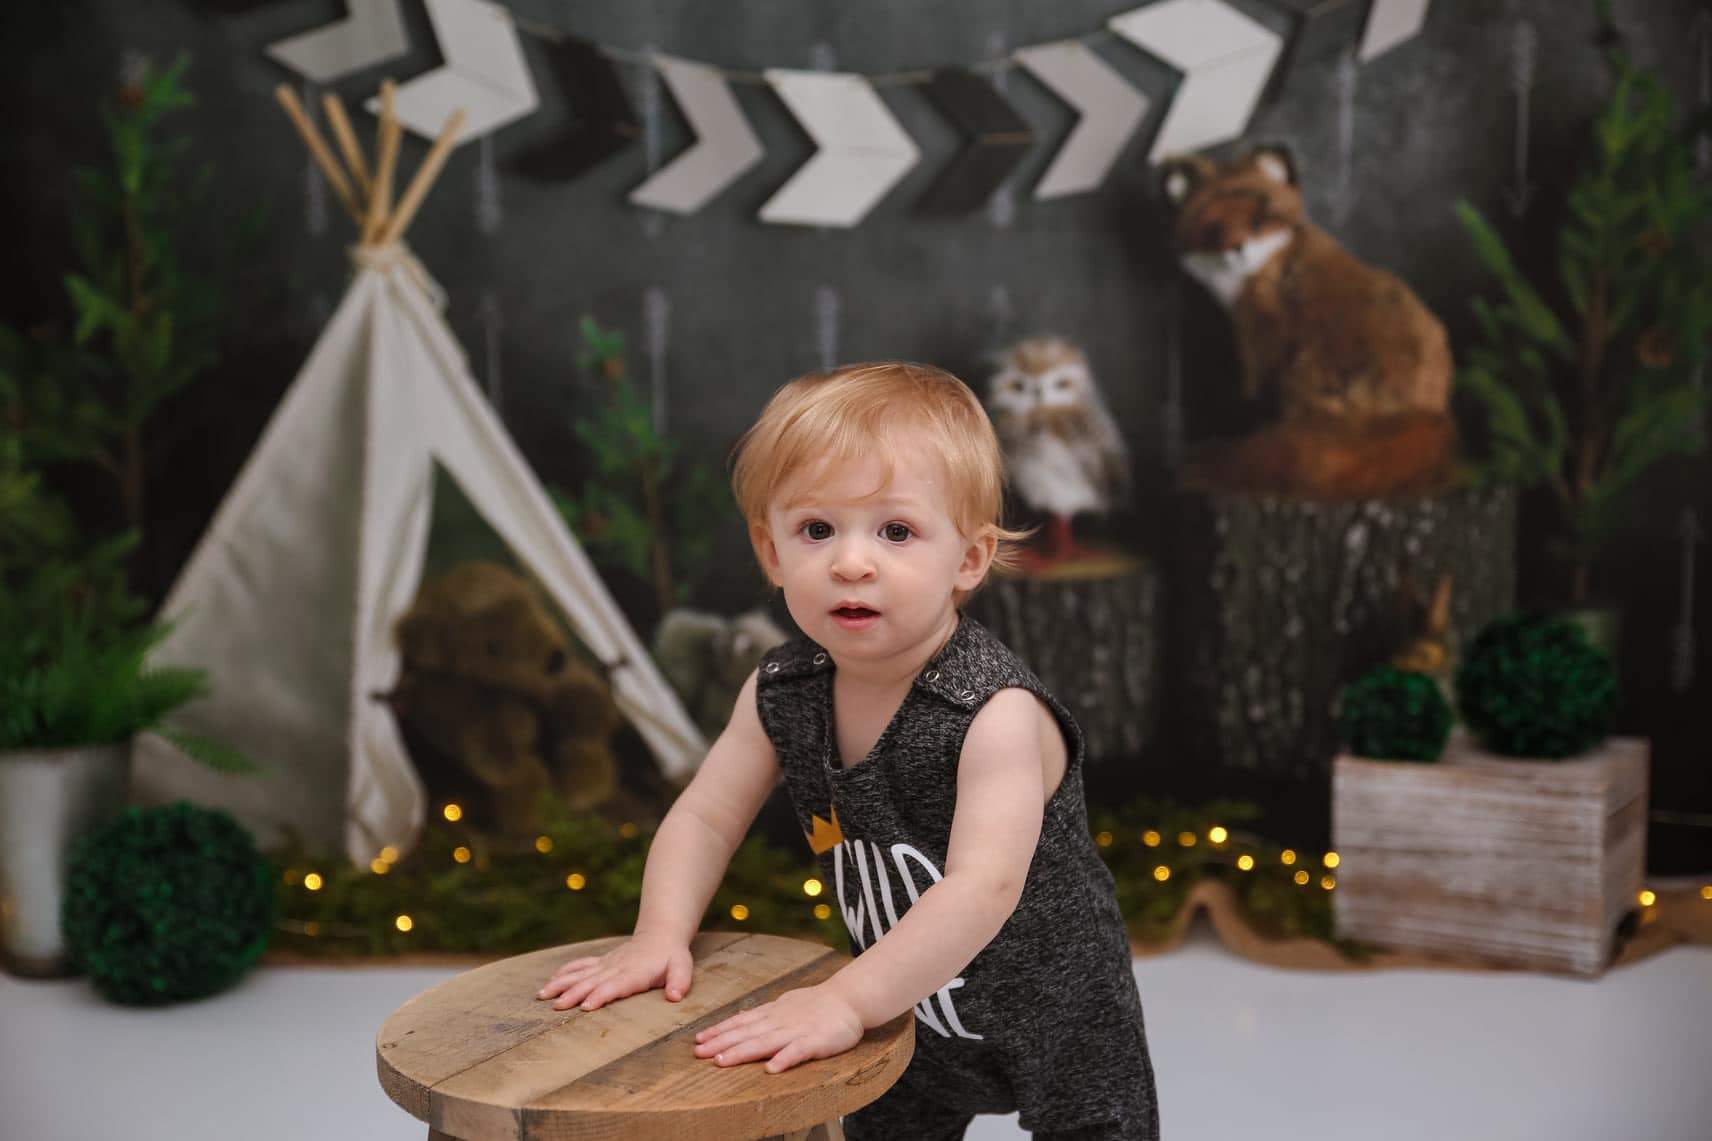 Kate Wild Birthday with Animals Children Backdrop Designed By Mandy Ringe Photography